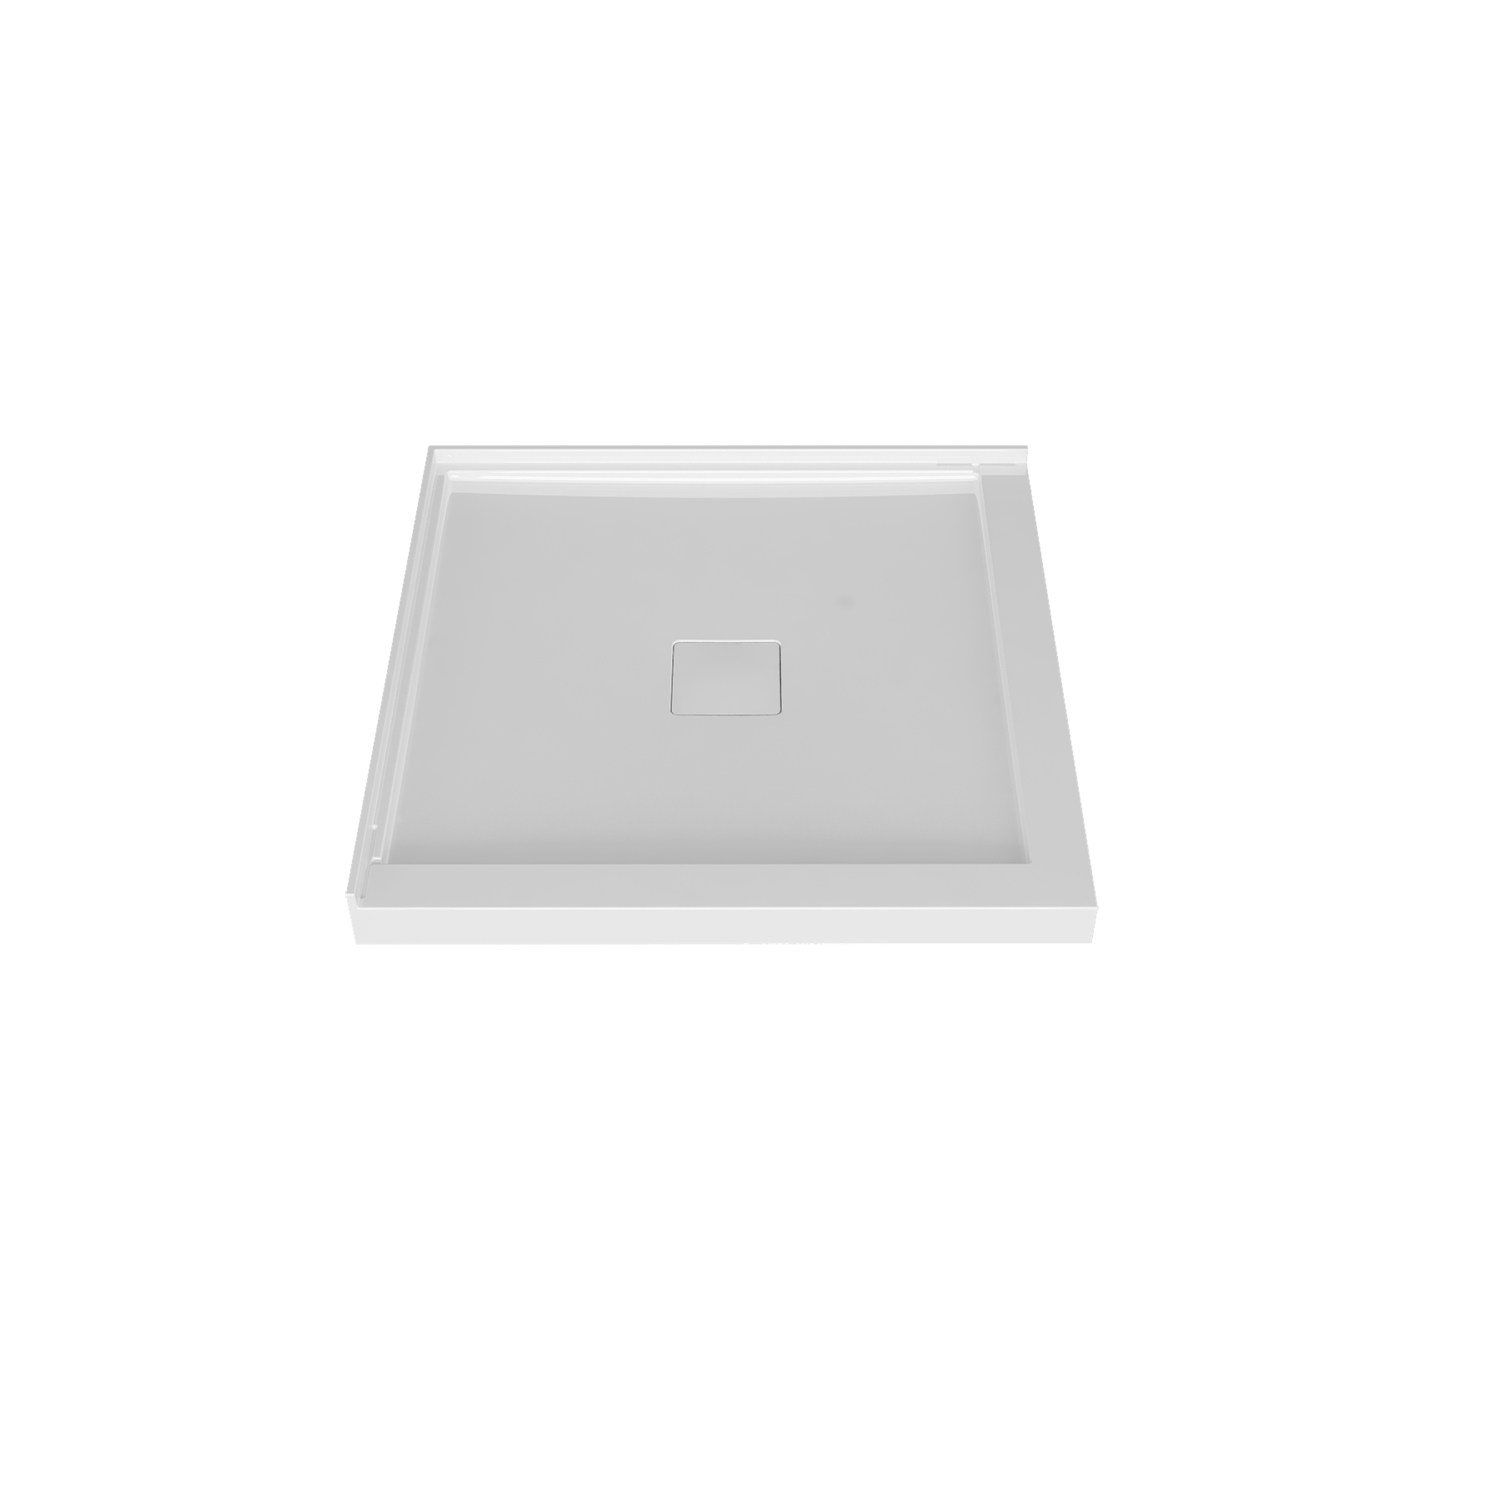 Shower base 32 x 32, in a corner, in glossy white